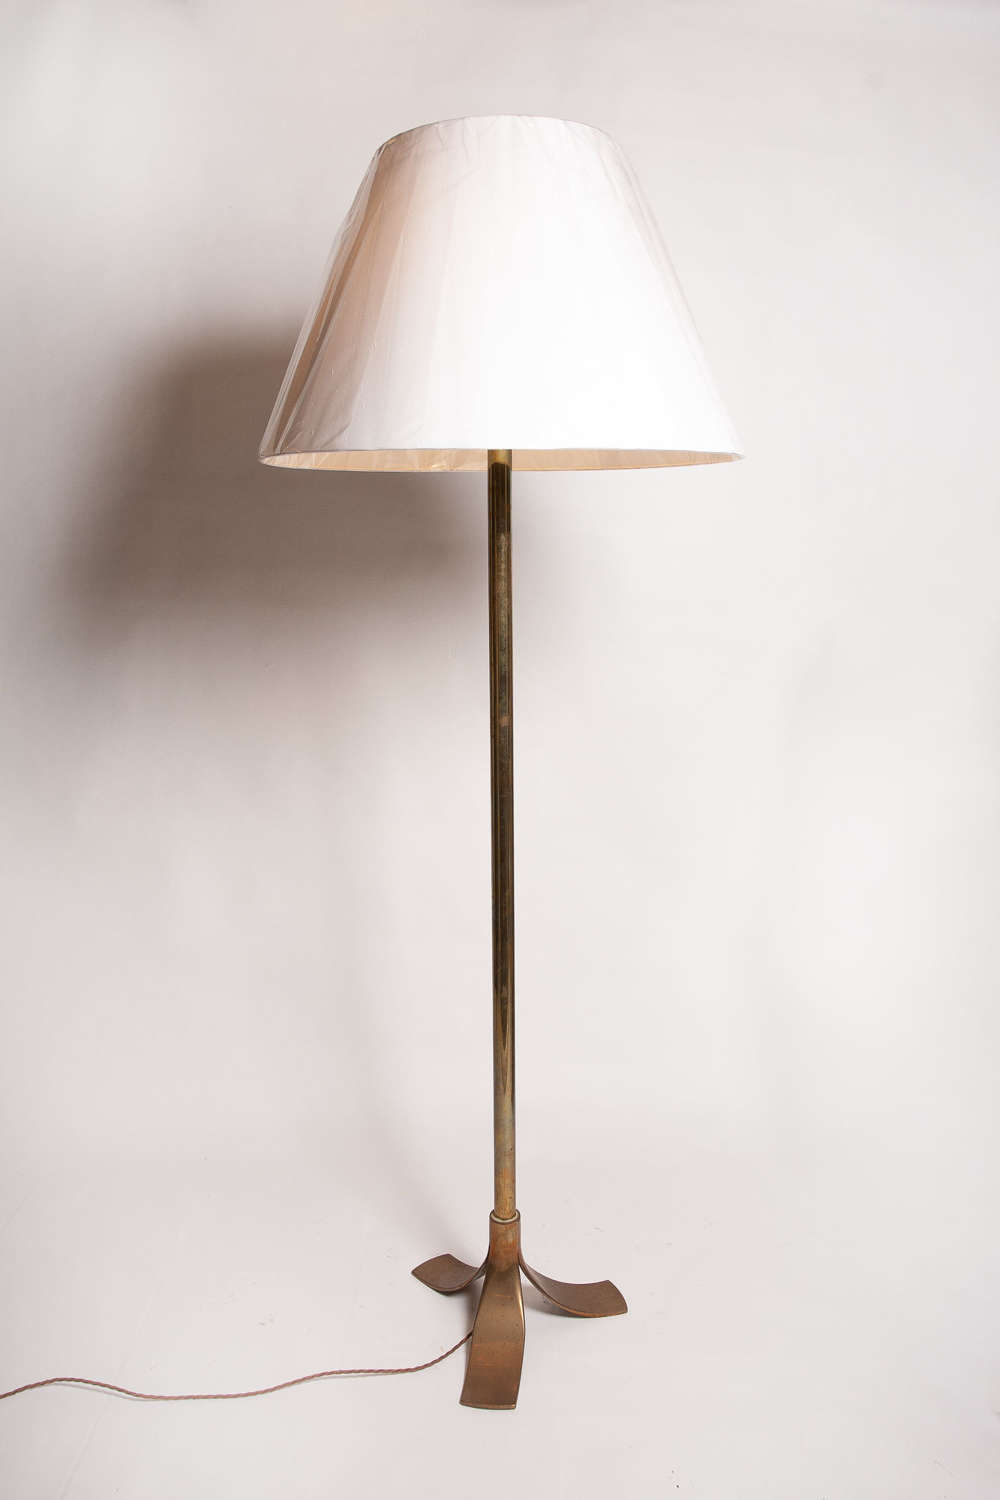 C1950 A Stylish French Brass Floor Lamp